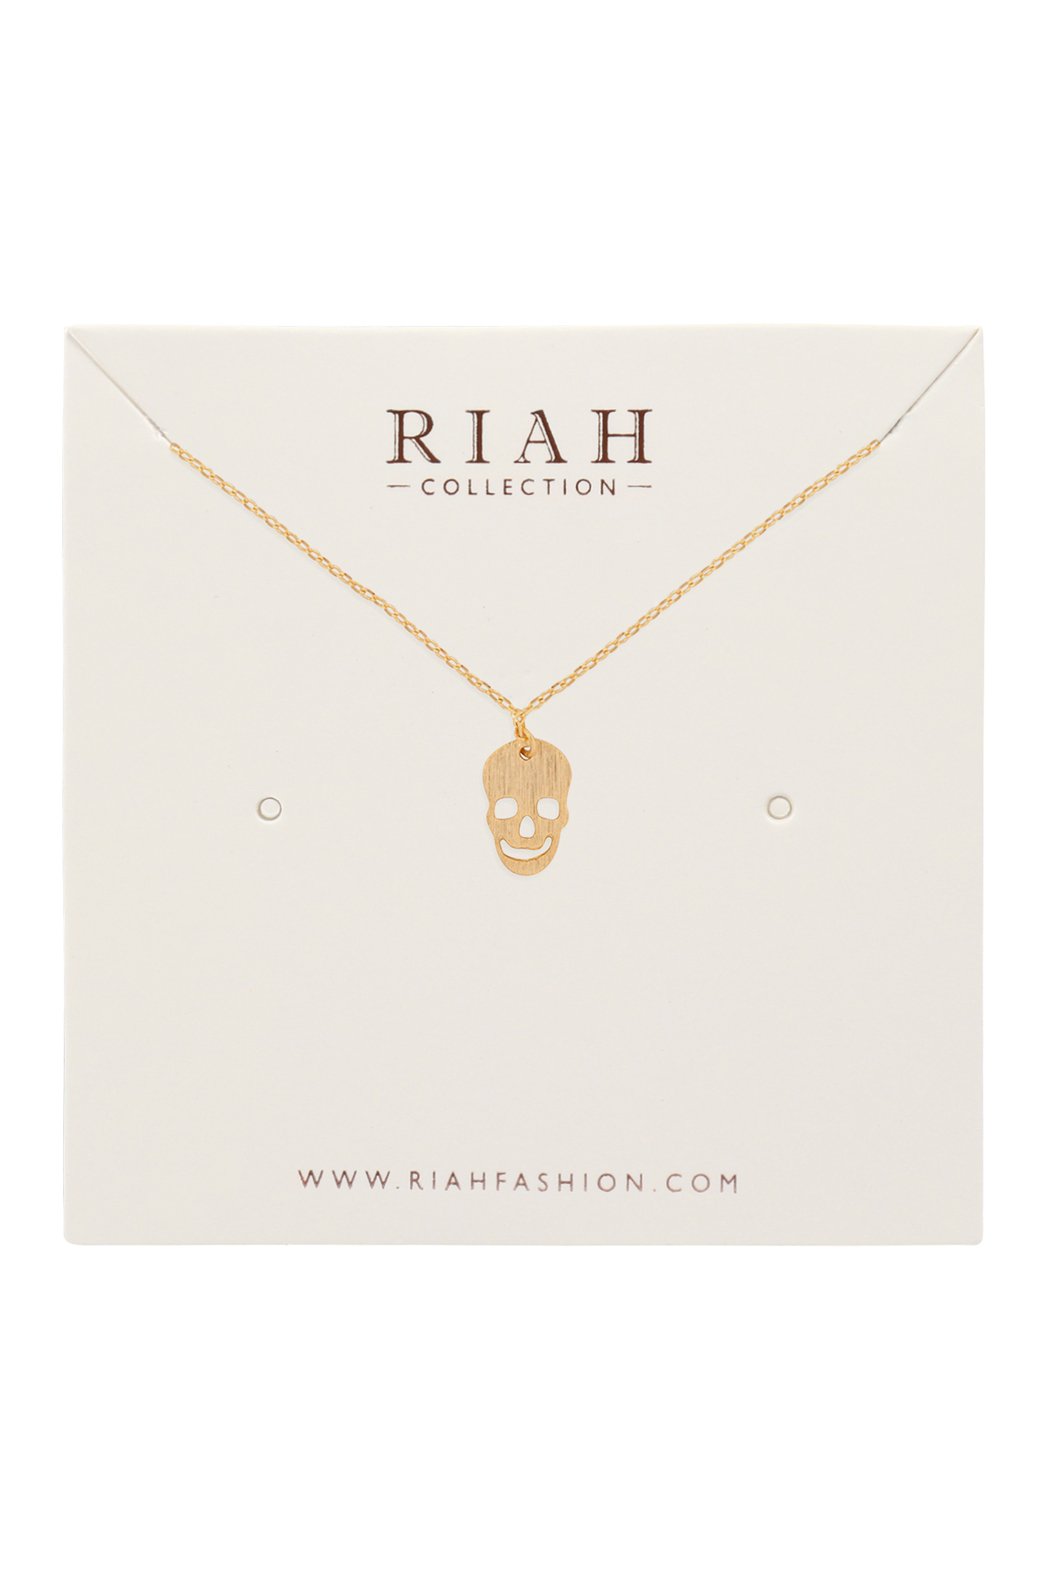 Hdnb3n279 - Skull Pendant Necklace - LOLA LUXE